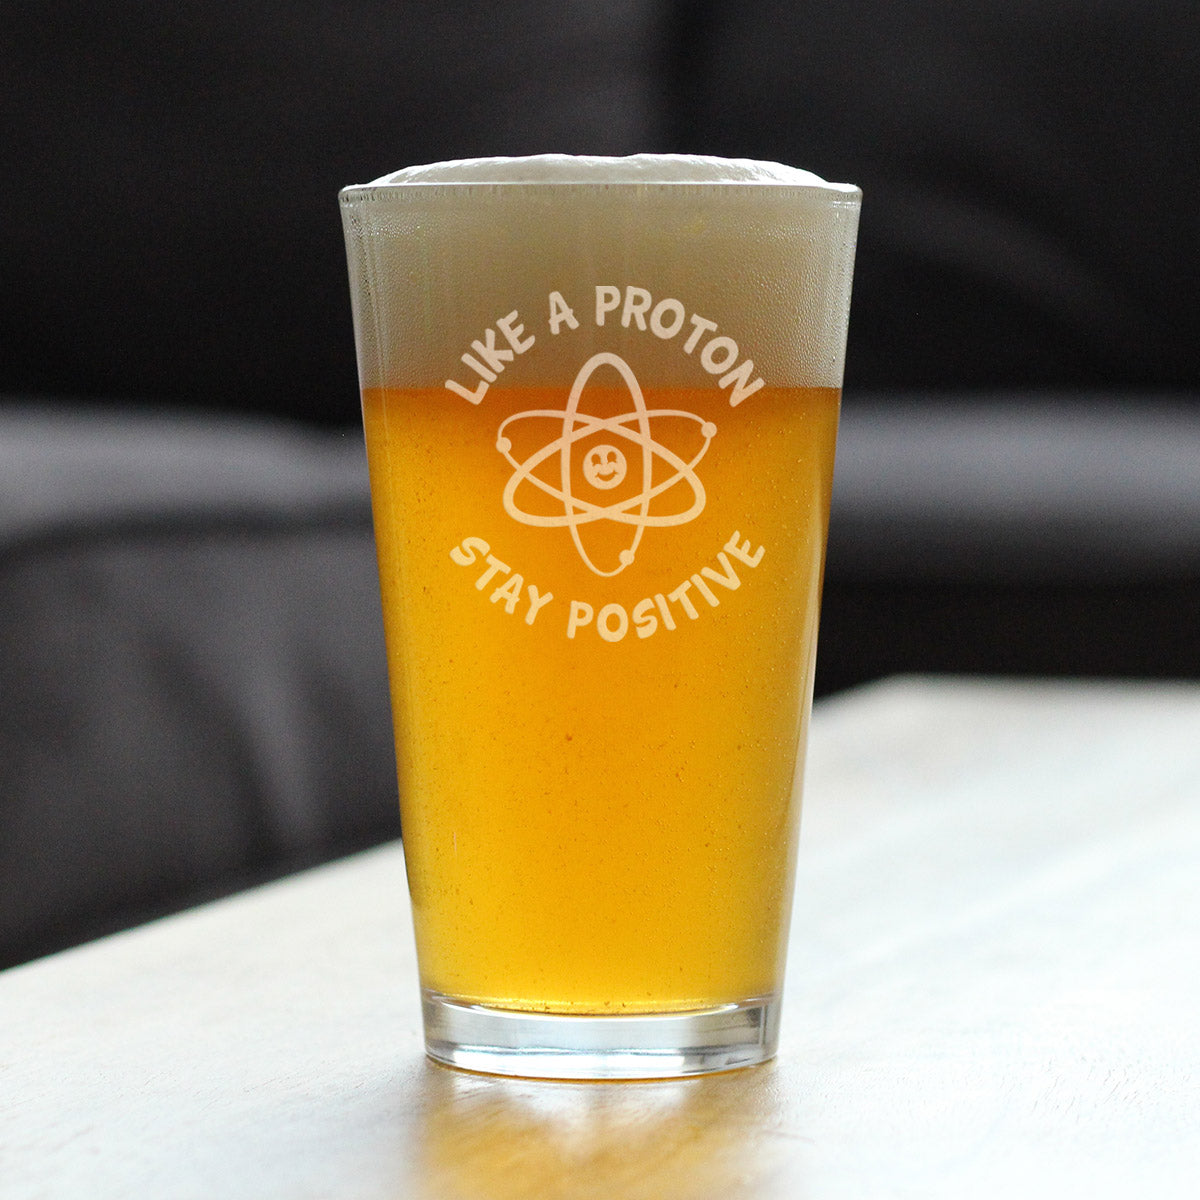 Like A Proton, Stay Positive - Pint Glass for Beer - Funny Science Teacher Gifts for Women &amp; Men - 16 oz Glasses